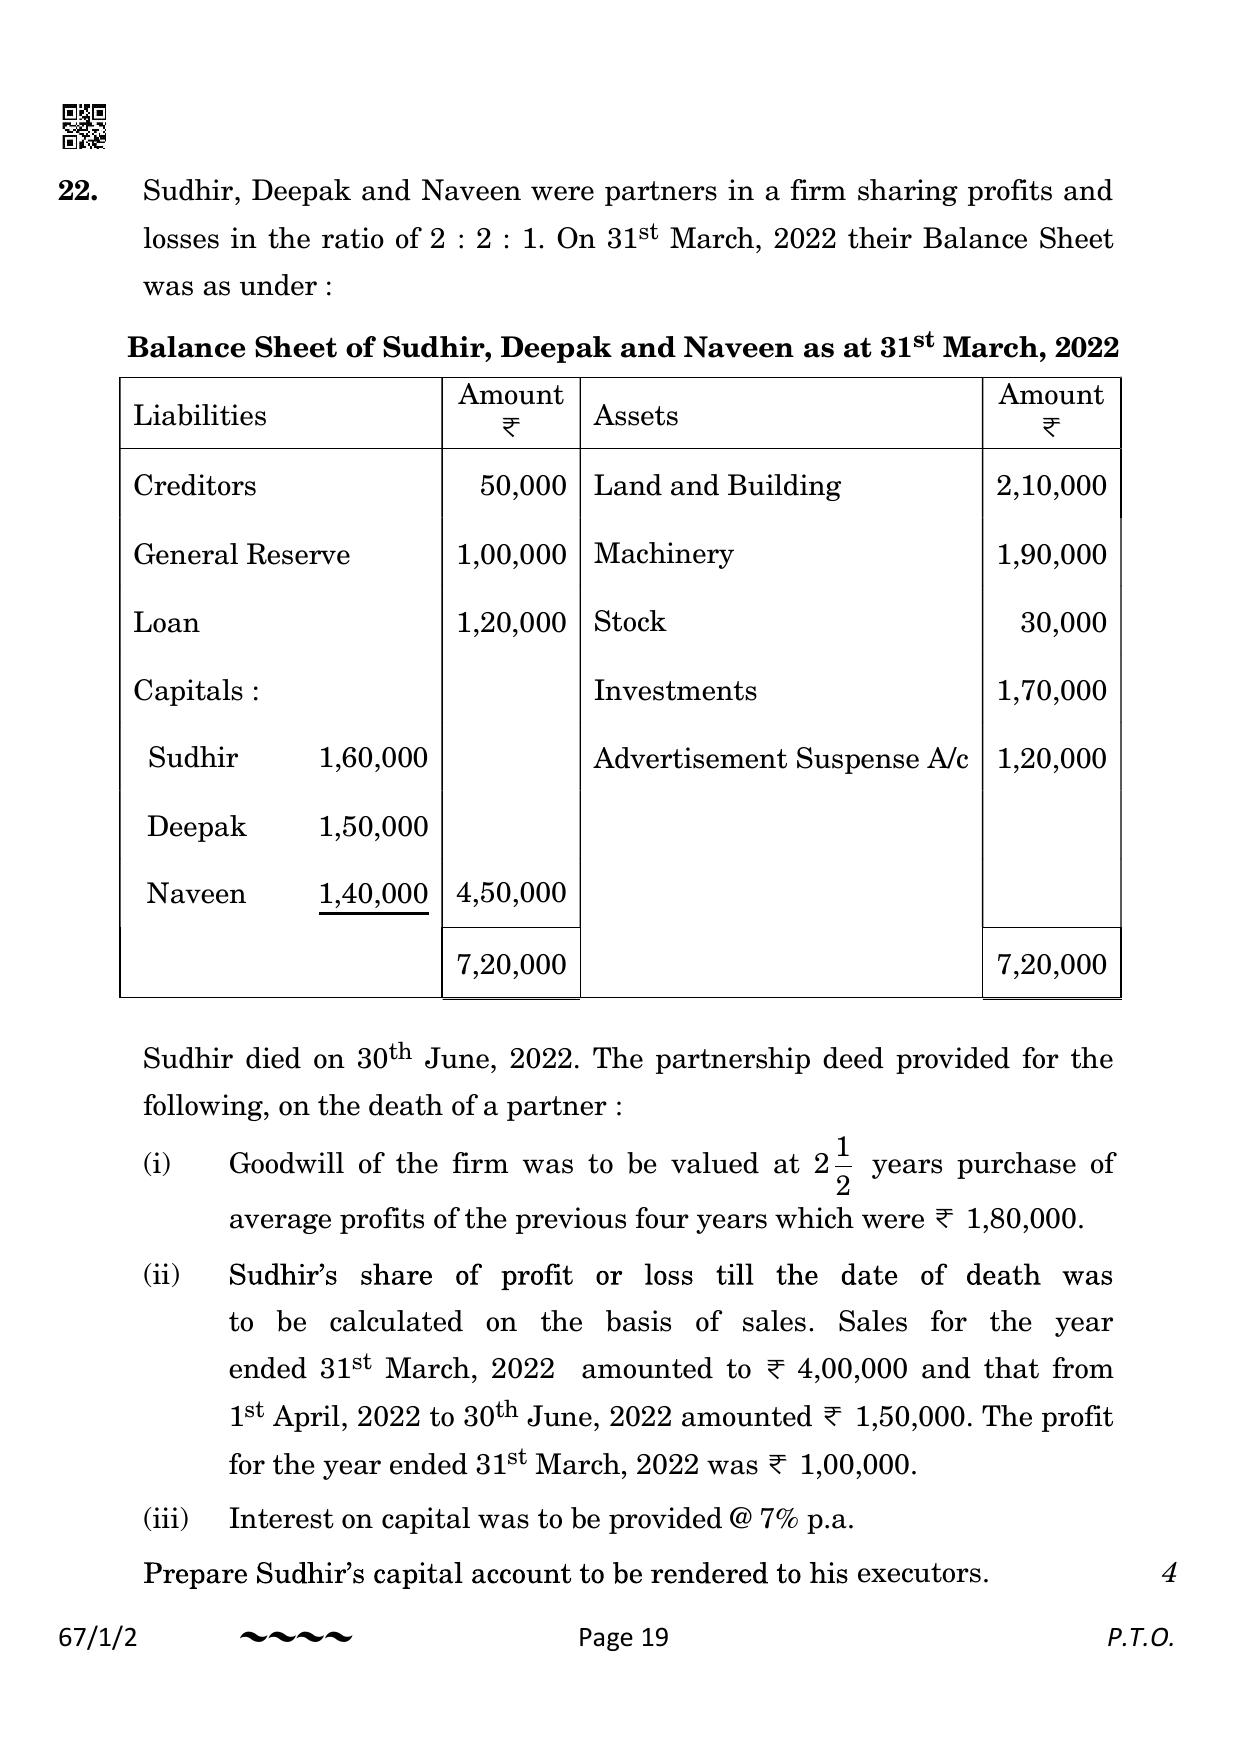 CBSE Class 12 67-1-2 Accountancy 2023 Question Paper - Page 19